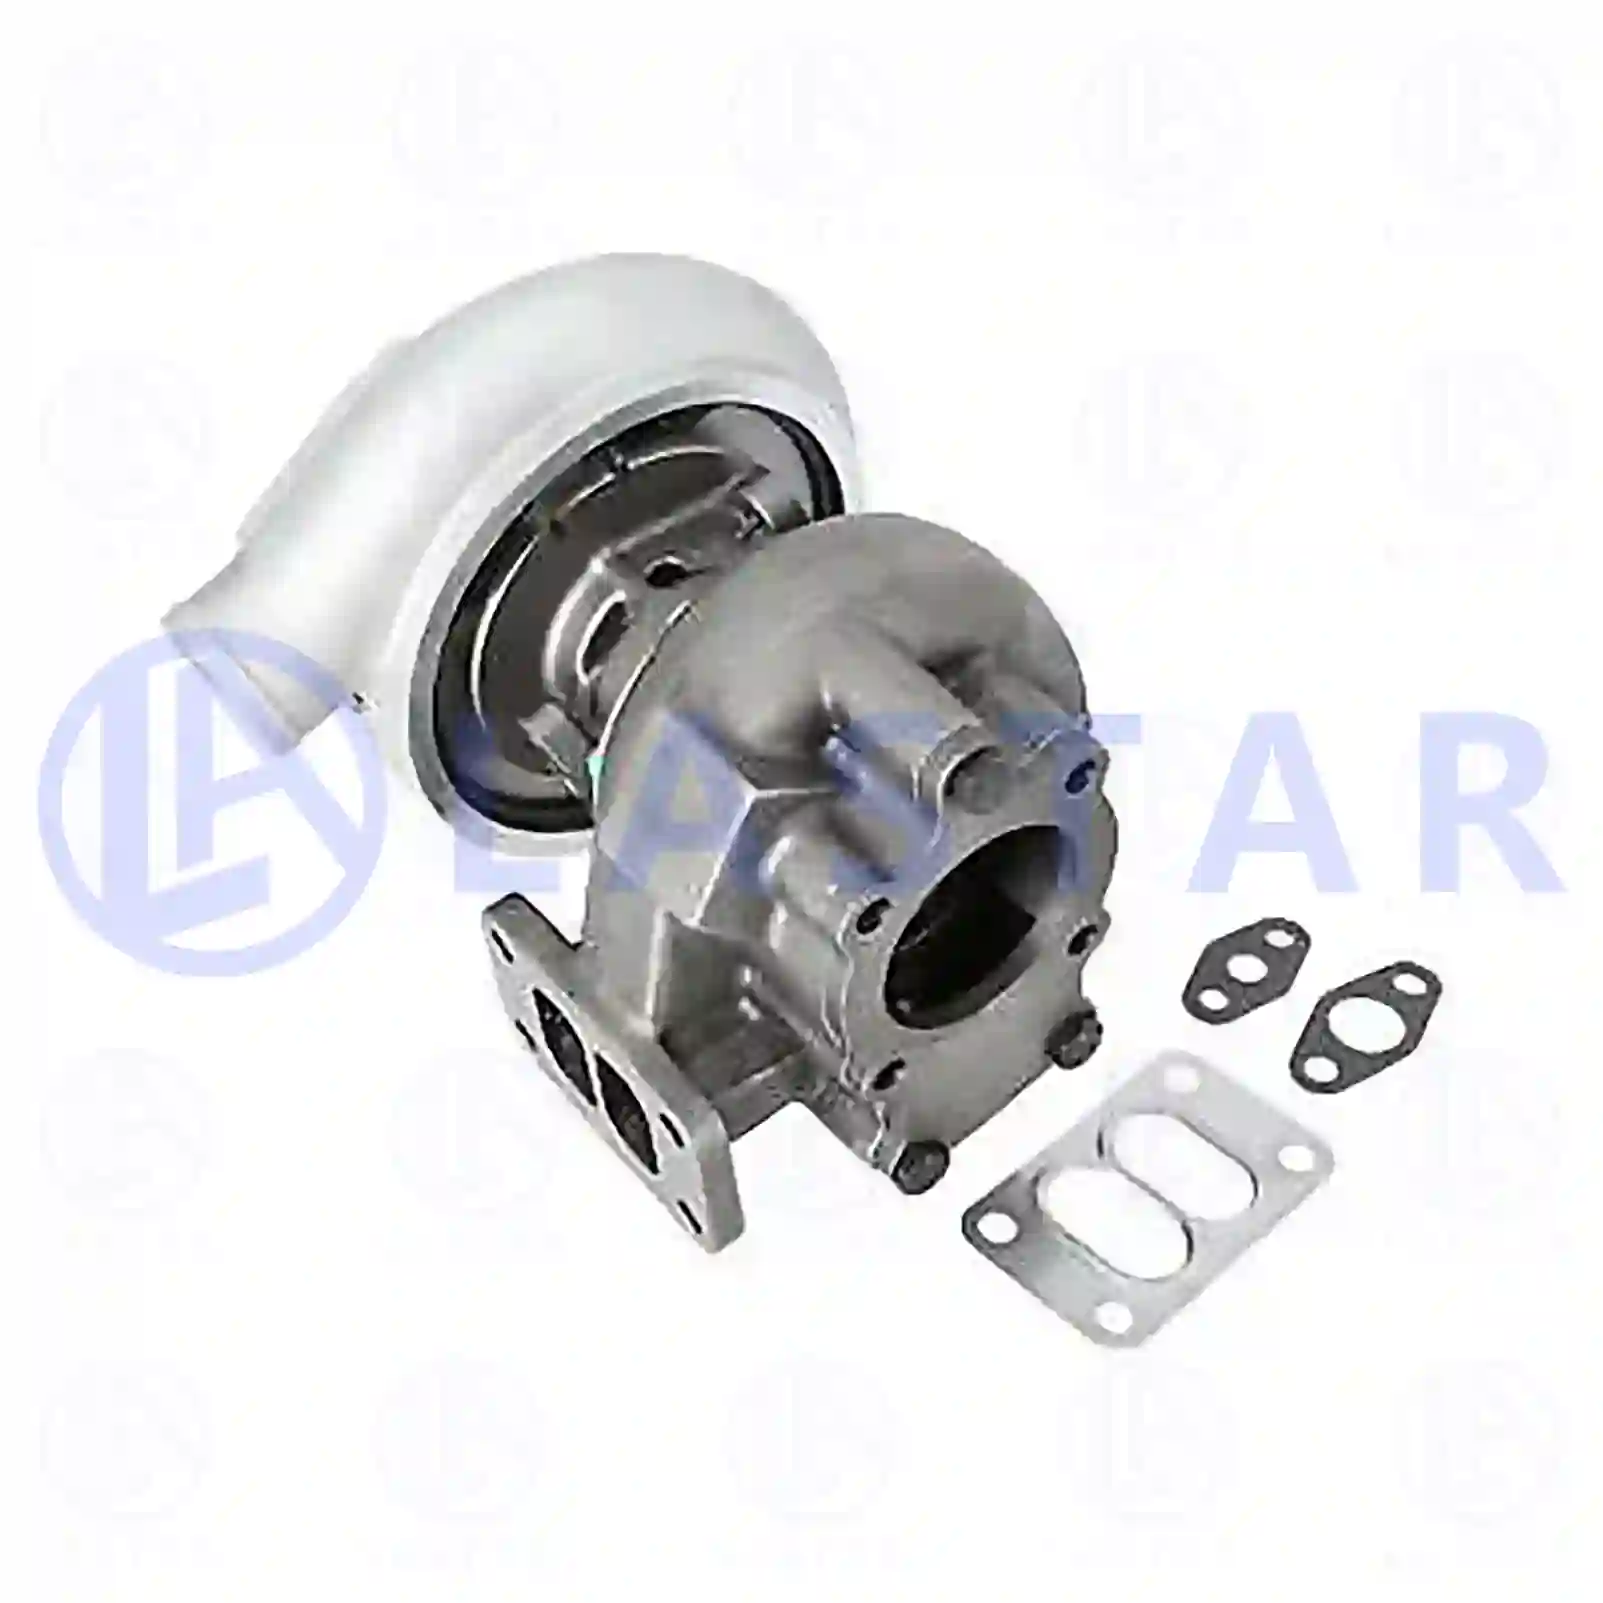 Turbocharger, with gasket kit, 77700376, 51091007298, 51091007321, 51091007439, 51091009298, 51091009321, 51091009439 ||  77700376 Lastar Spare Part | Truck Spare Parts, Auotomotive Spare Parts Turbocharger, with gasket kit, 77700376, 51091007298, 51091007321, 51091007439, 51091009298, 51091009321, 51091009439 ||  77700376 Lastar Spare Part | Truck Spare Parts, Auotomotive Spare Parts